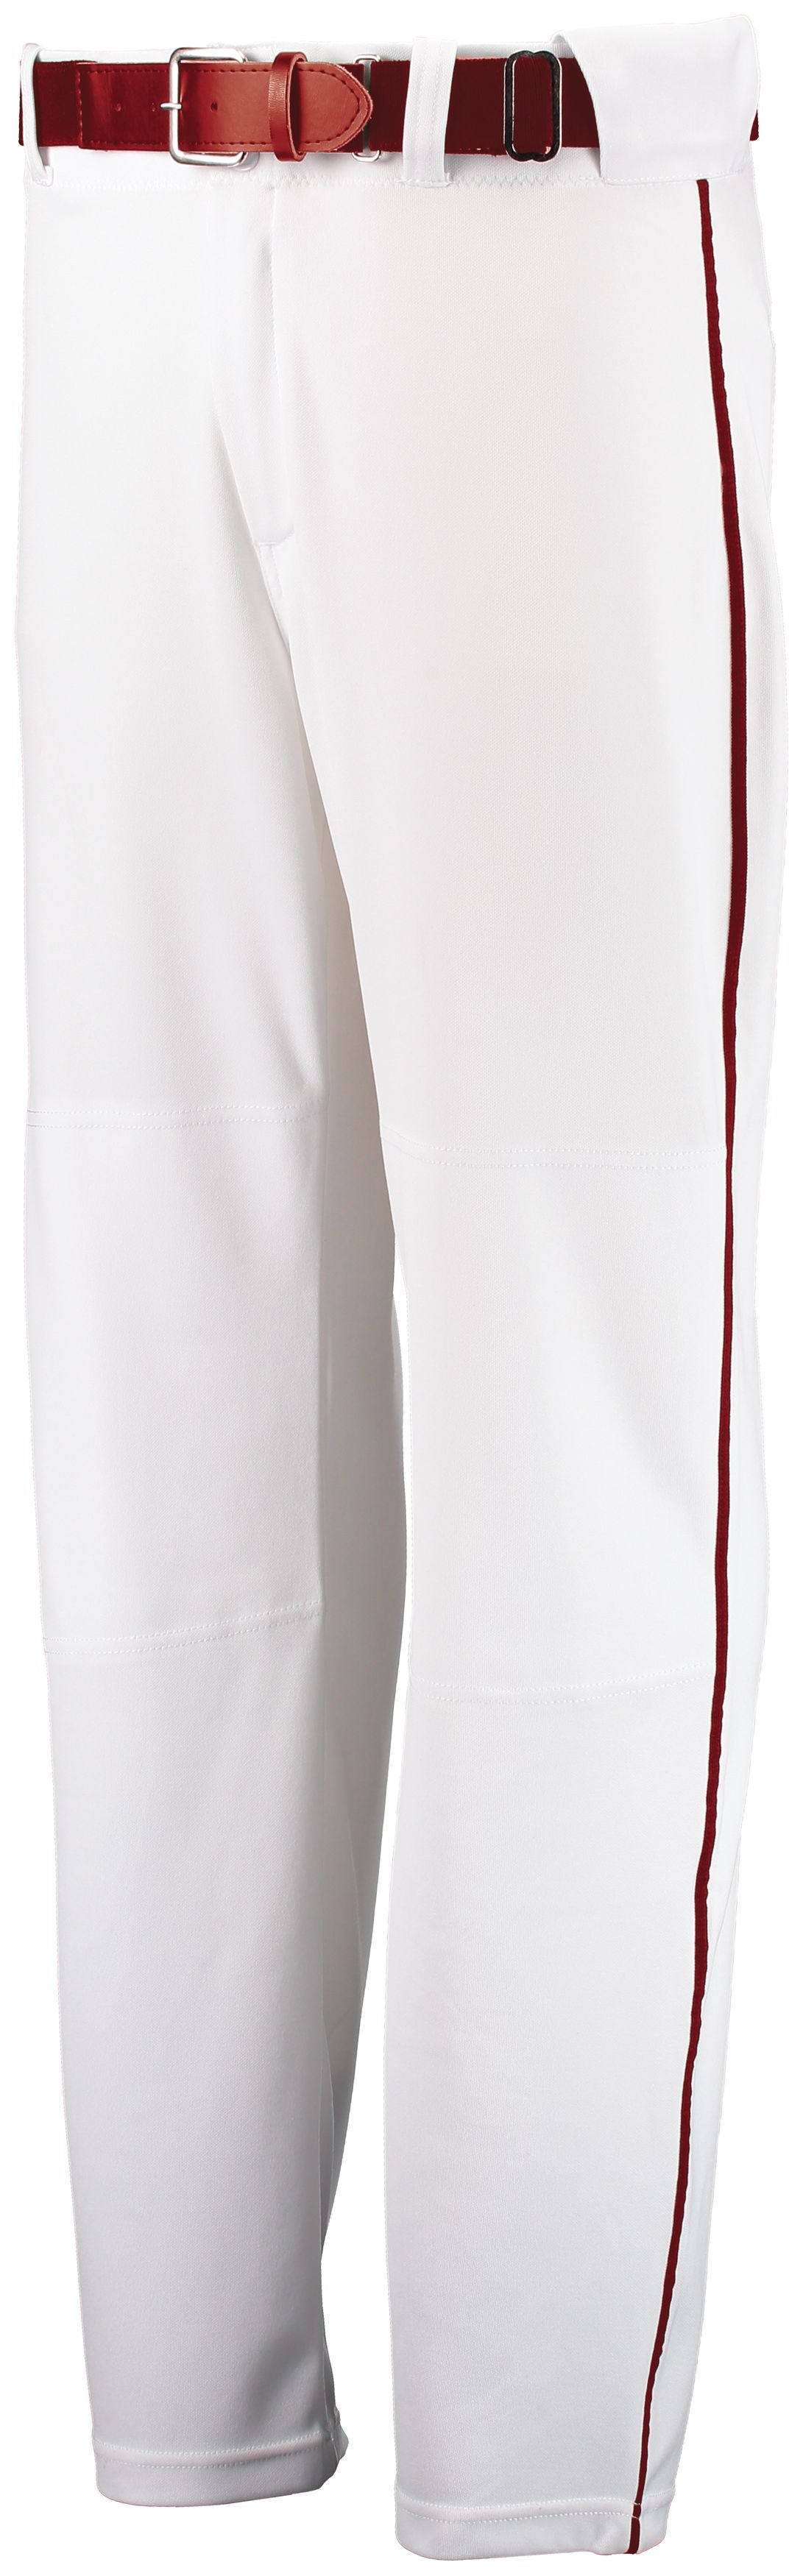 Russell Athletic Open Bottom Piped Pant in White/True Red  -Part of the Adult, Adult-Pants, Pants, Baseball, Russell-Athletic-Products, All-Sports, All-Sports-1 product lines at KanaleyCreations.com